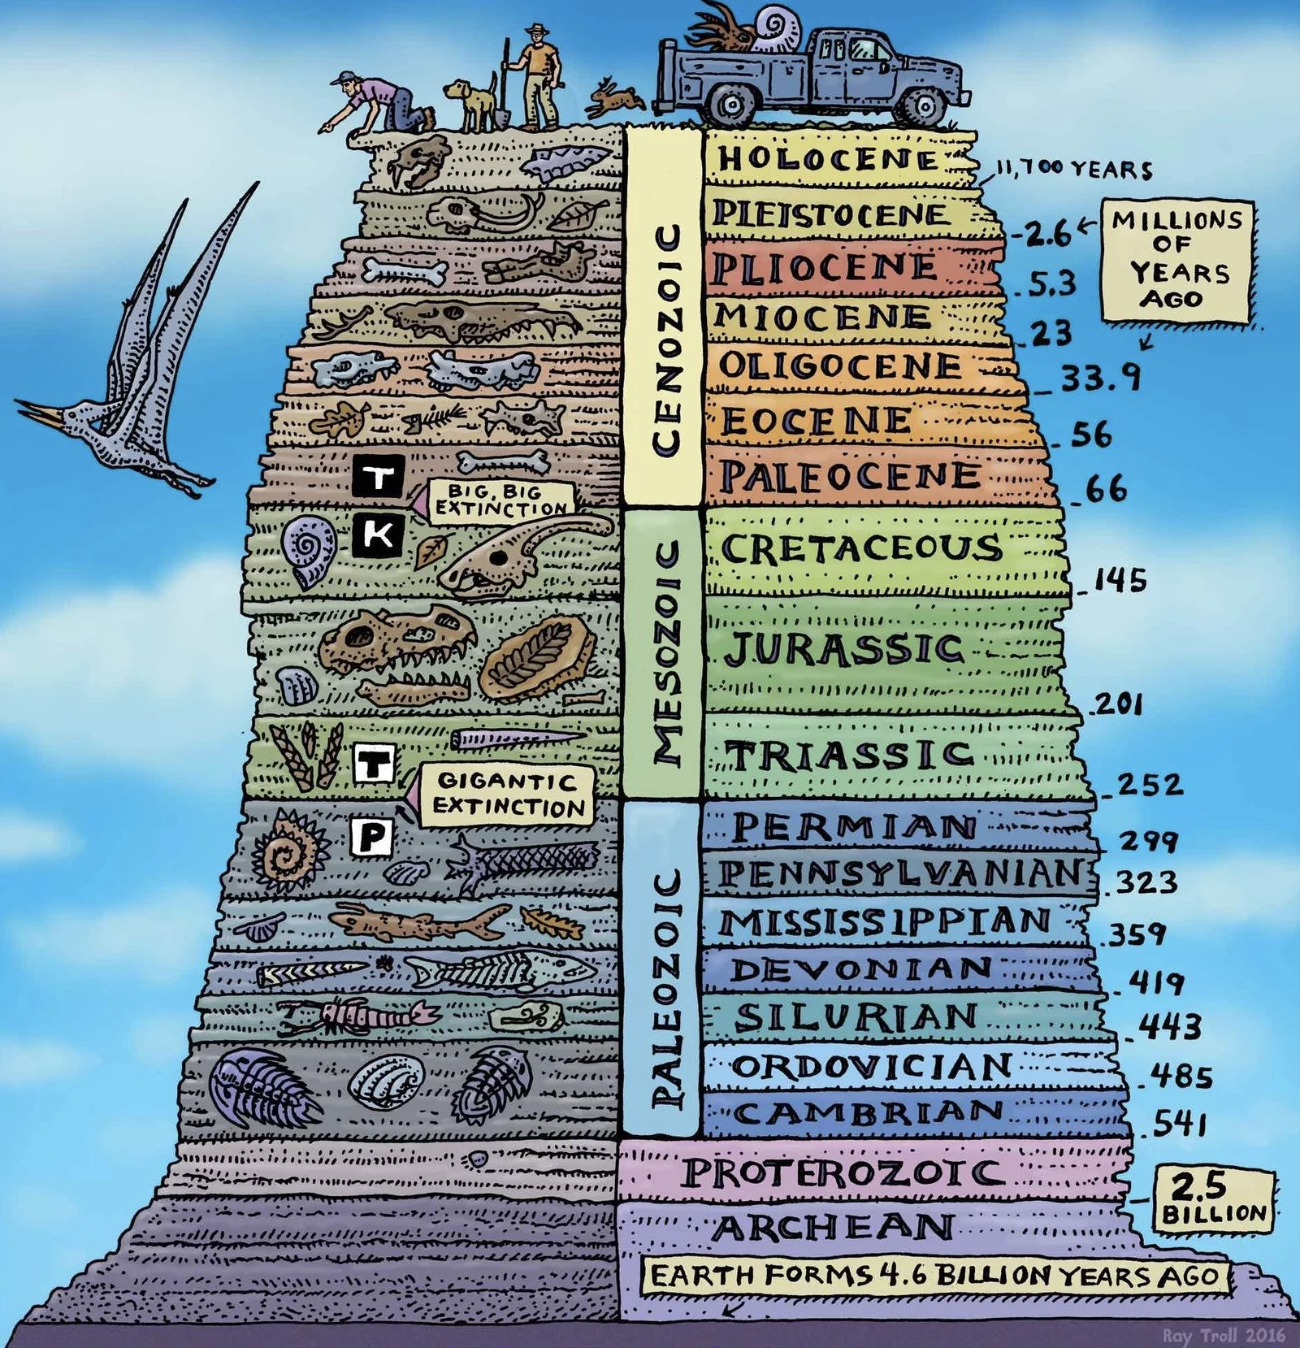 Illustration of humans adding a layer to the geological record by Ray Troll/Troll Art via NPR